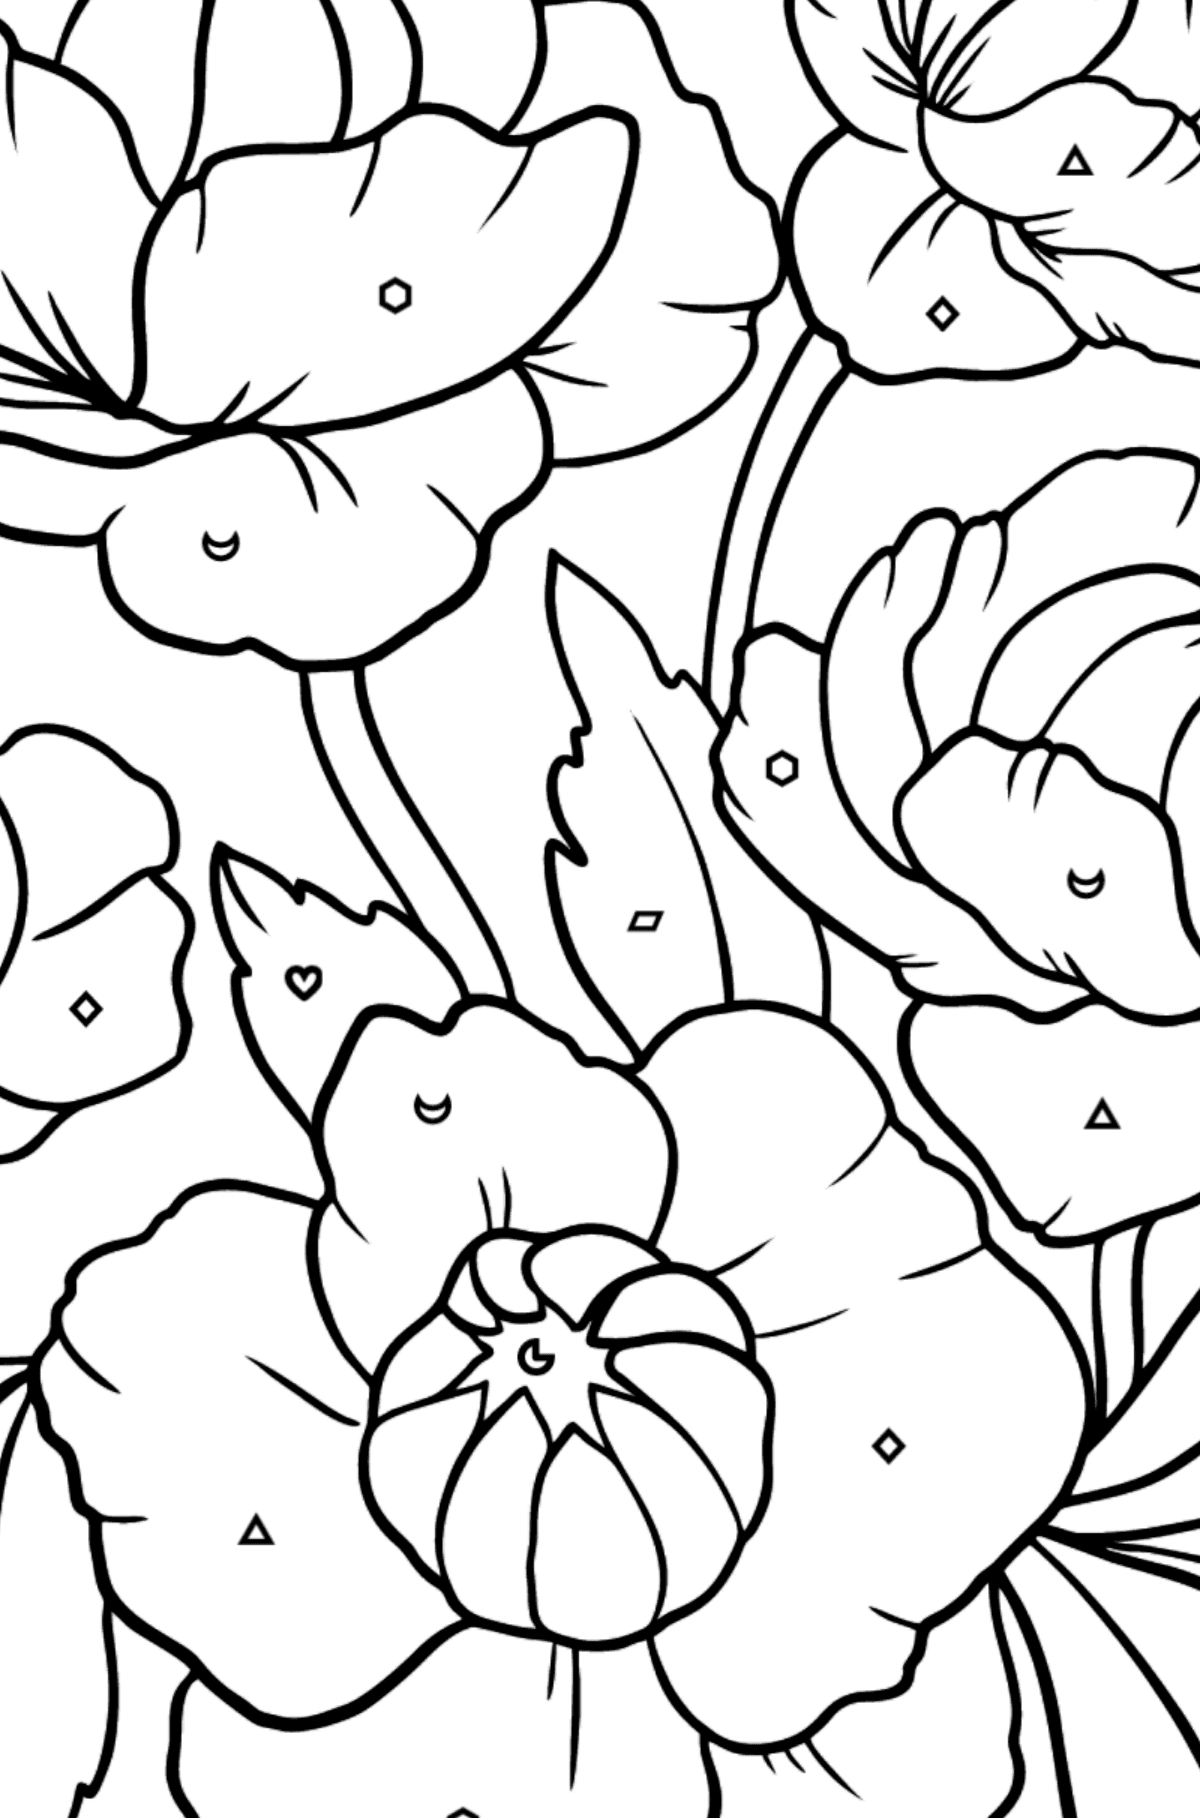 Flower Coloring Page - A Pink Globeflower - Coloring by Geometric Shapes for Kids